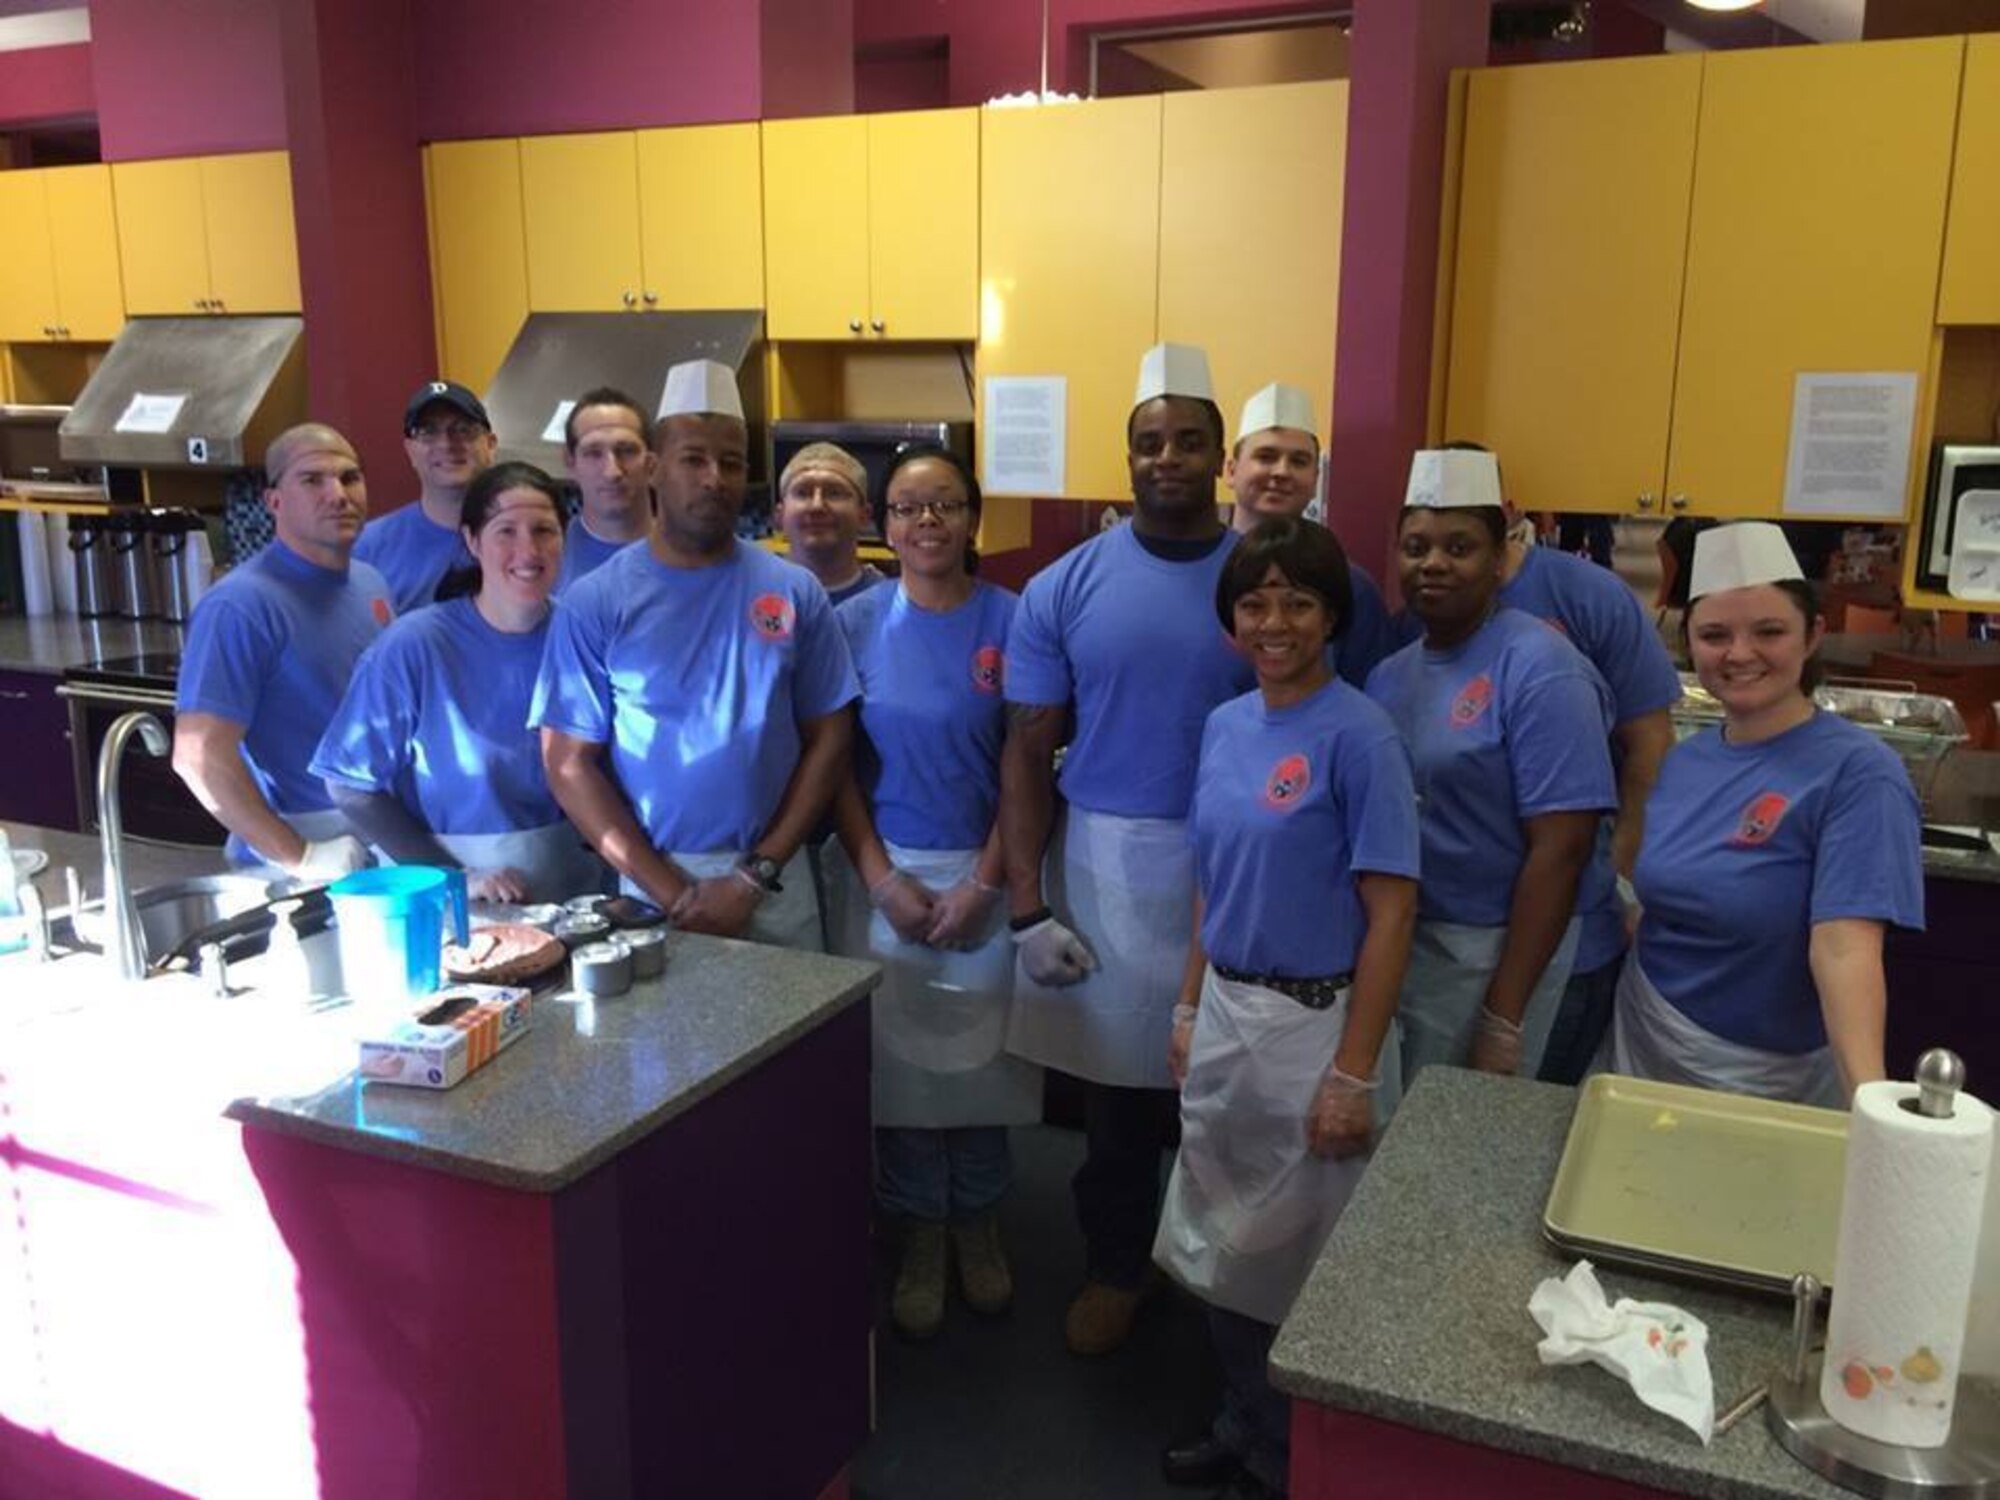 Approximately 15 members of the Tennessee Air National Guard's 164th Airlift Wing Mission Support Group, out of Memphis, Tenn., volunteered their time at St. Jude's Ronald McDonald House, serving breakfast to more than 80 families and patients on Dec. 21, 2014. (Left to right) Staff Sgt. Troy Pollock, Staff Sgt. Tim Andrassy, Tech Sgt. Elizabeth von Allmen, SSgt. Robert Morgan, TSgt. Al Wilson, TSgt. Nathaniel von Allmen, SSgt. Vanessa Nickles, Senior Airmen Terrance Jones, Airman 1st Class John Oliver, Master Sgt. Vanilla Nixon, Tech Sgt. Sherveta Campbell, Staff Sgt. Shane Howell, and Tech Sgt. Melissa Scott. (US Air National Guard photo provided by the 164th Airlift Wing/RELEASED)